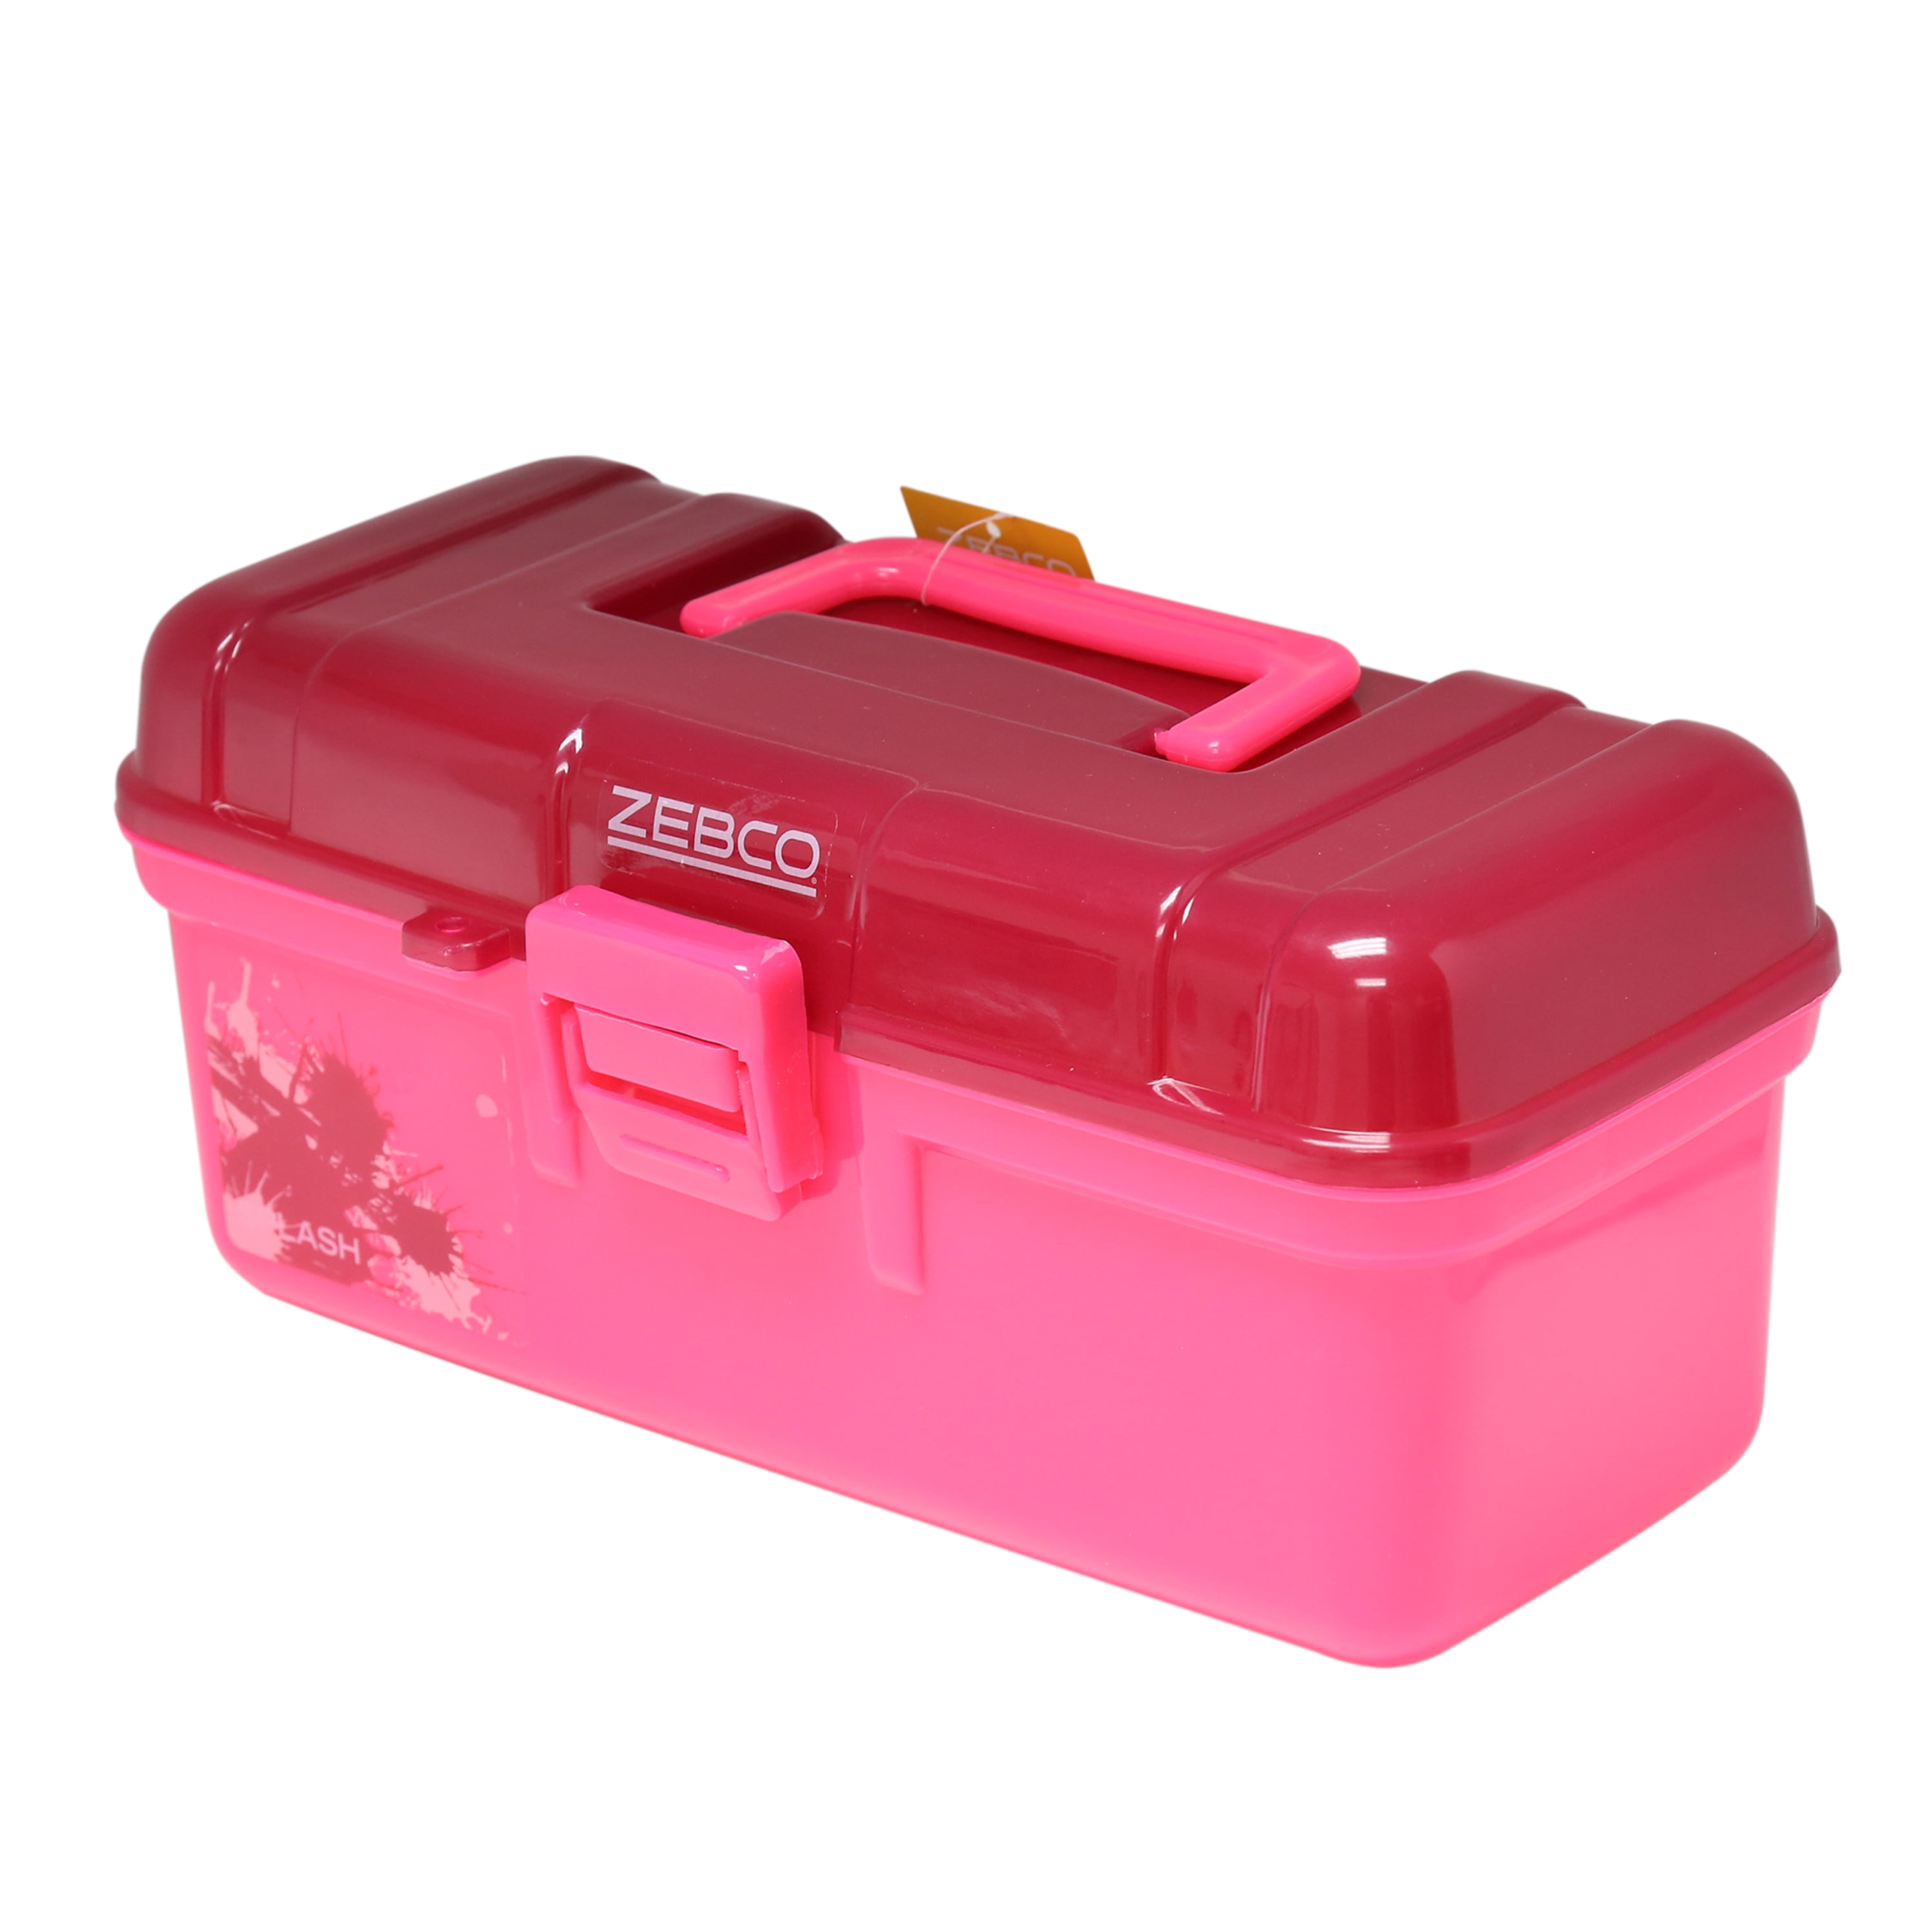 Zebco Splash Youth Fishing Tackle Box Kit with 57 Pieces, Pink, Small